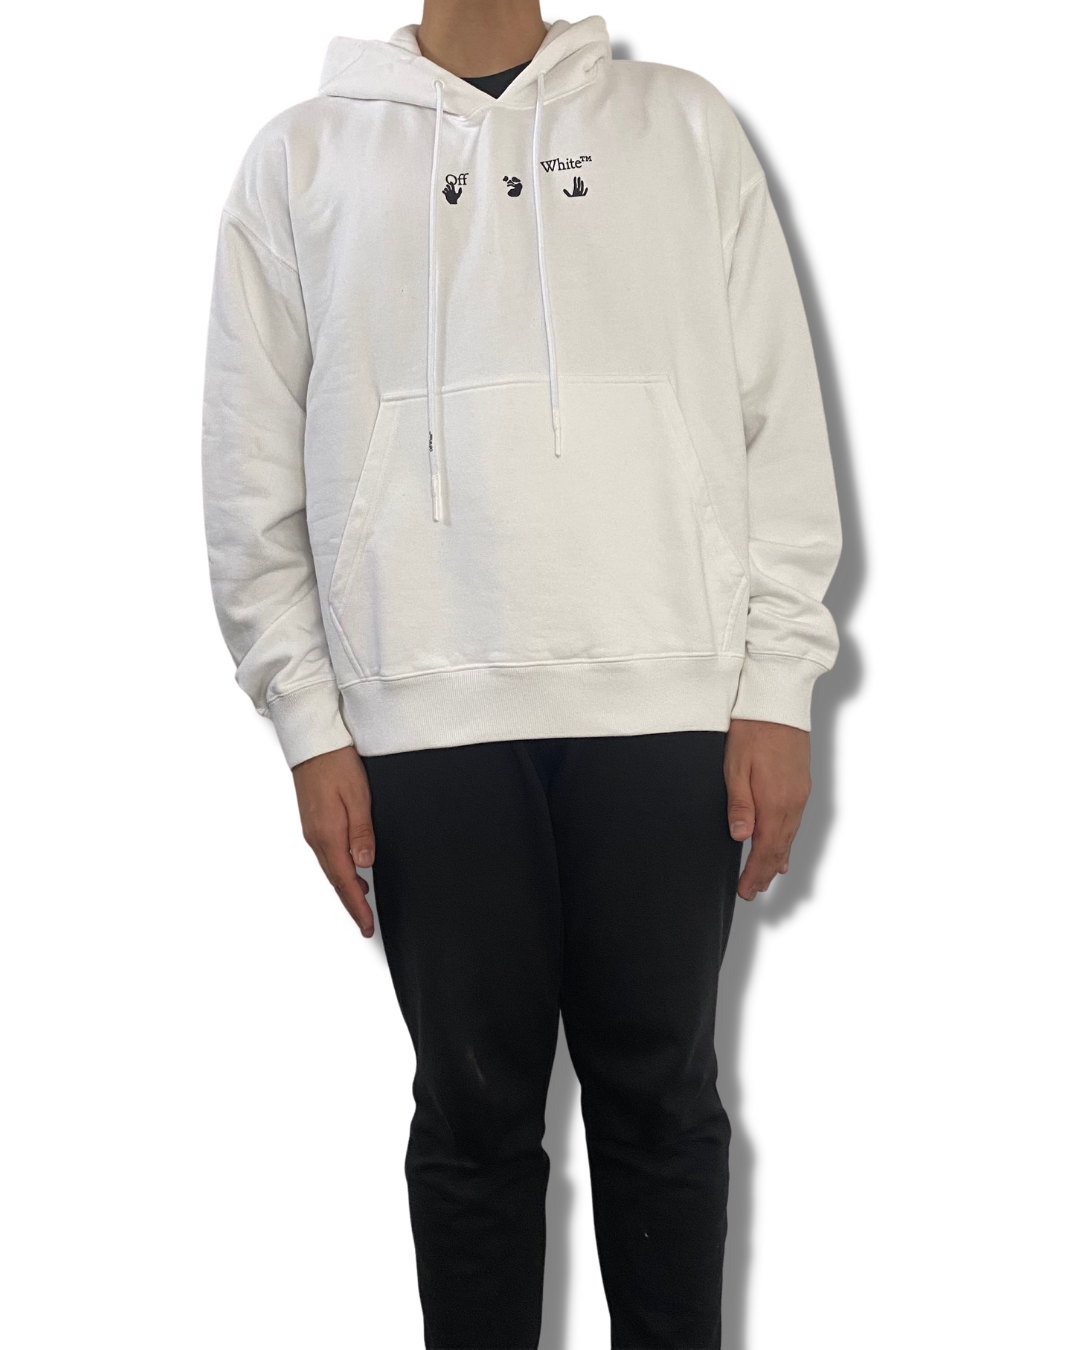 Off White Negative Marker Arrows Hoodie White